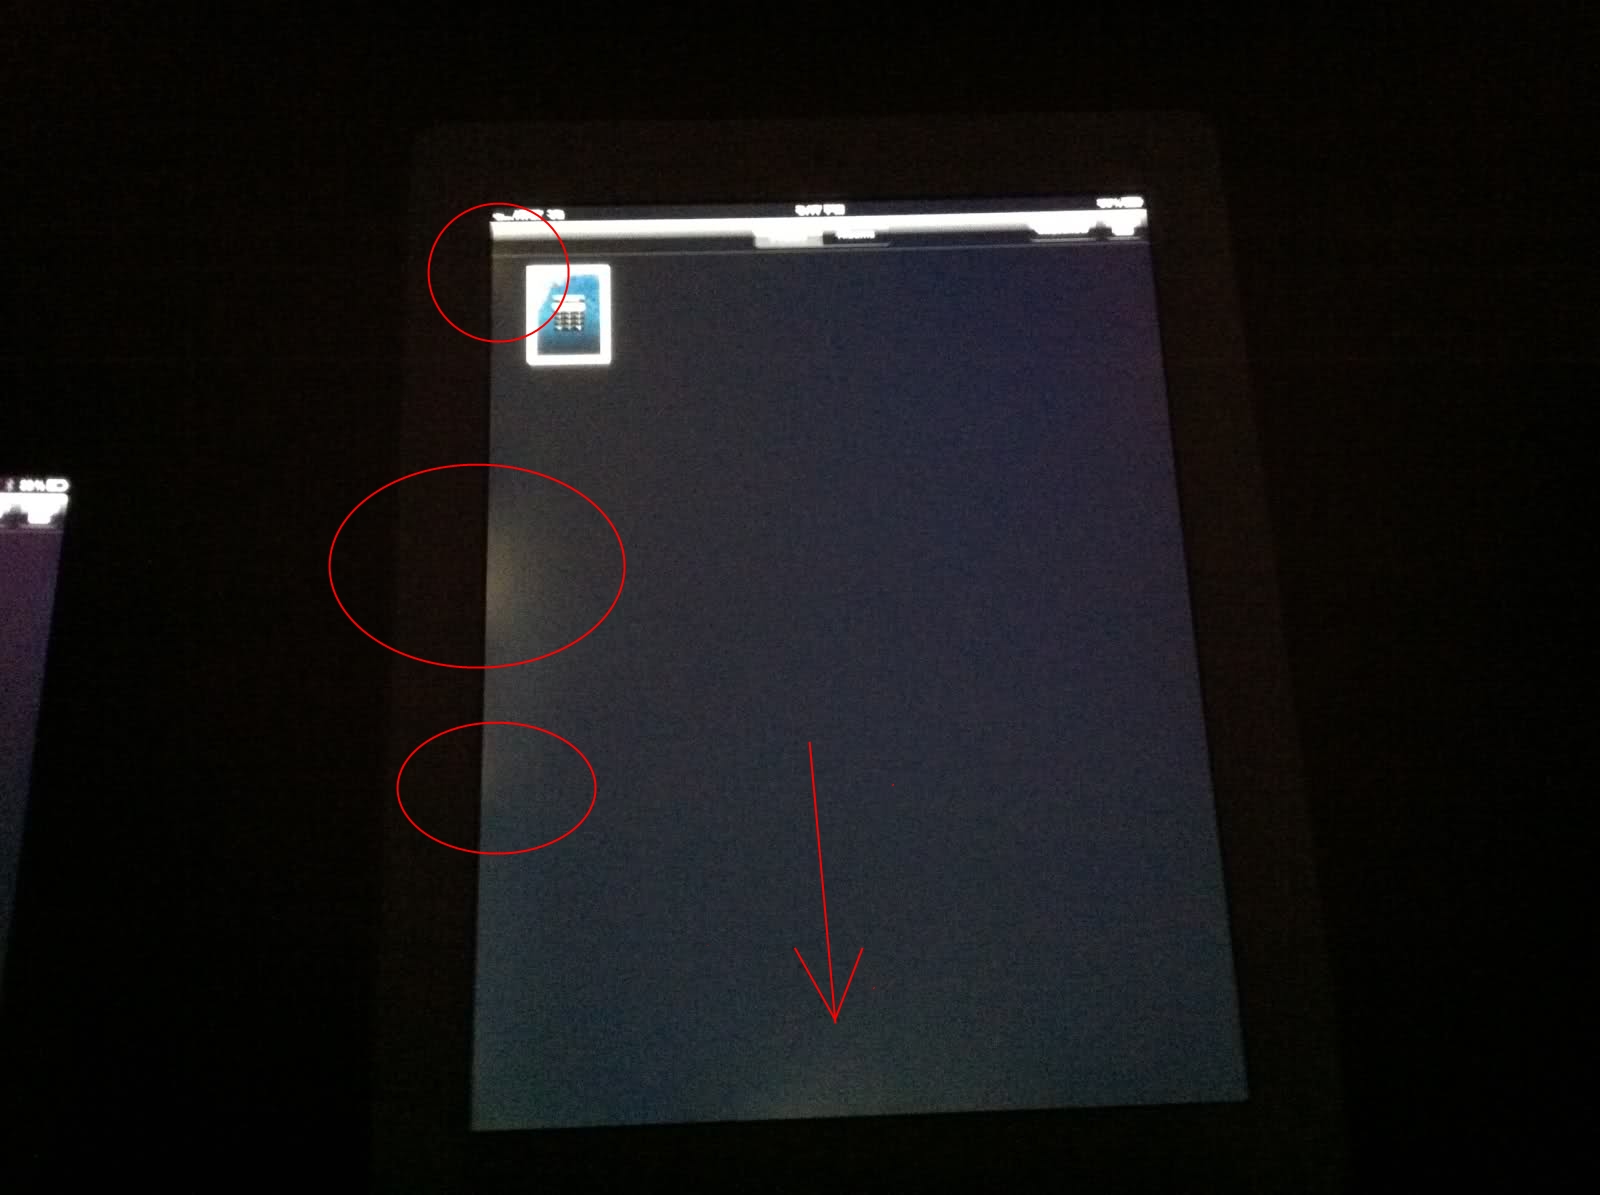 iPad 2 : Light leaking from Screen (Check the red rings)